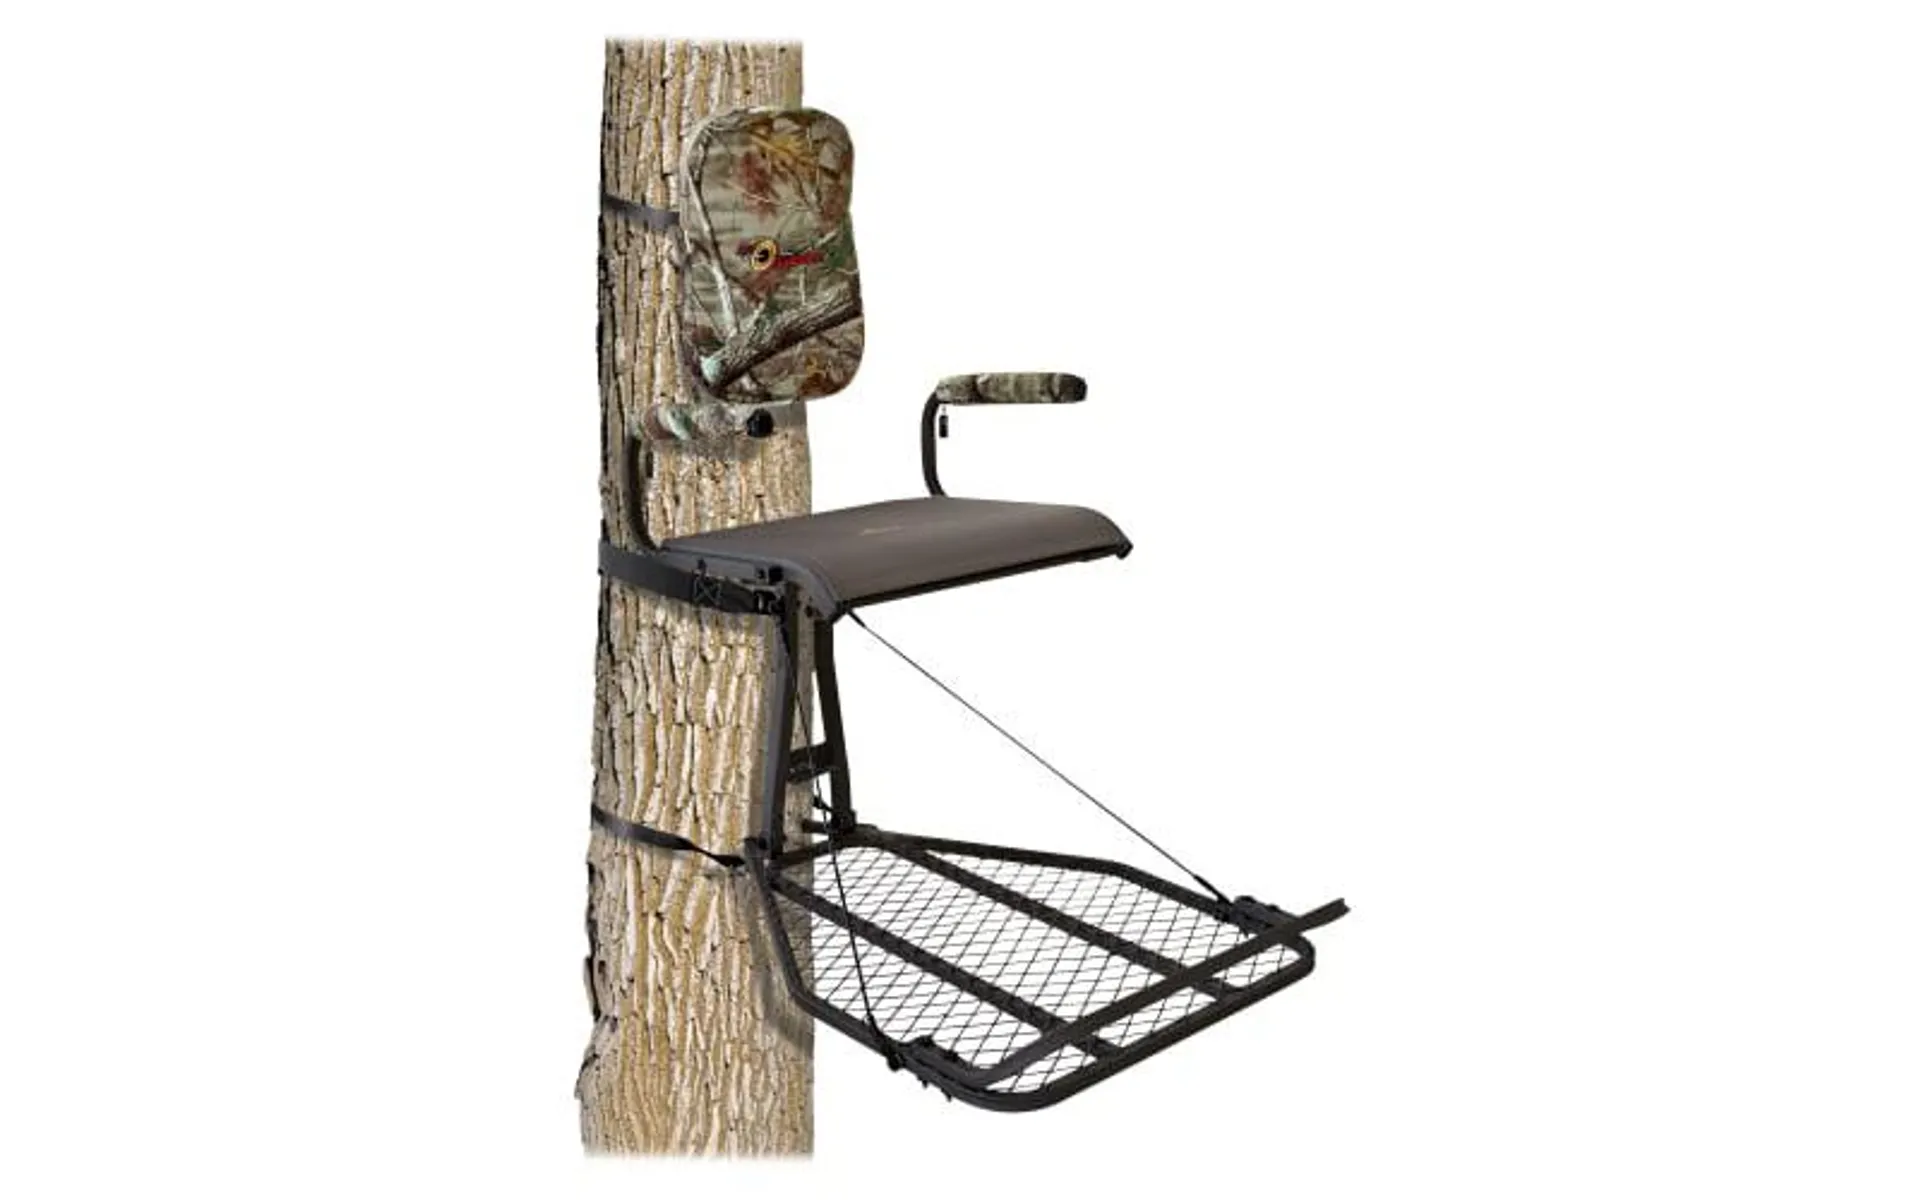 API Outdoors Voyager Extreme Fixed Position Treestand